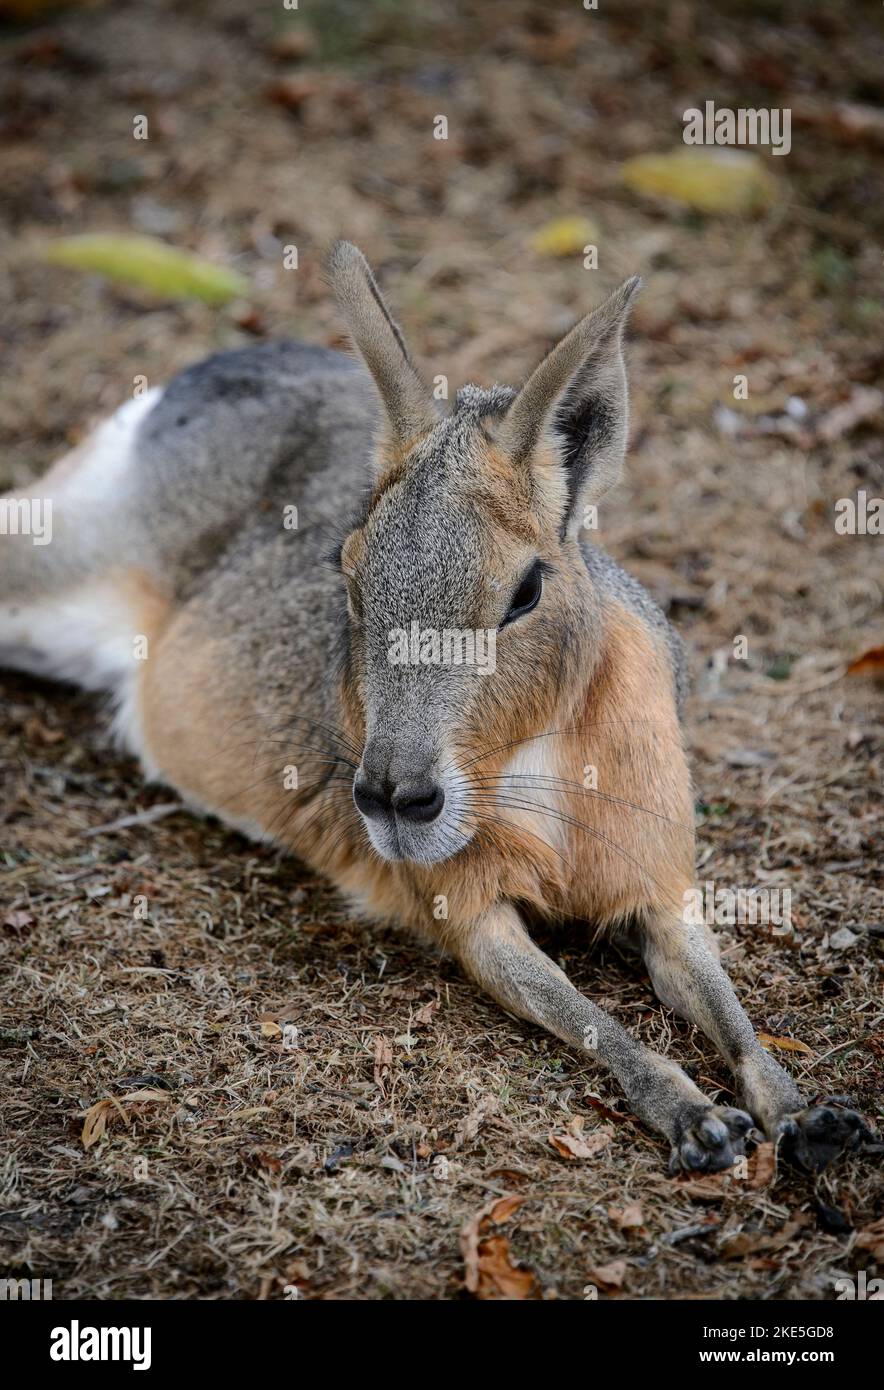 A Patagonian mara in captivity at a zoo in England. Stock Photo